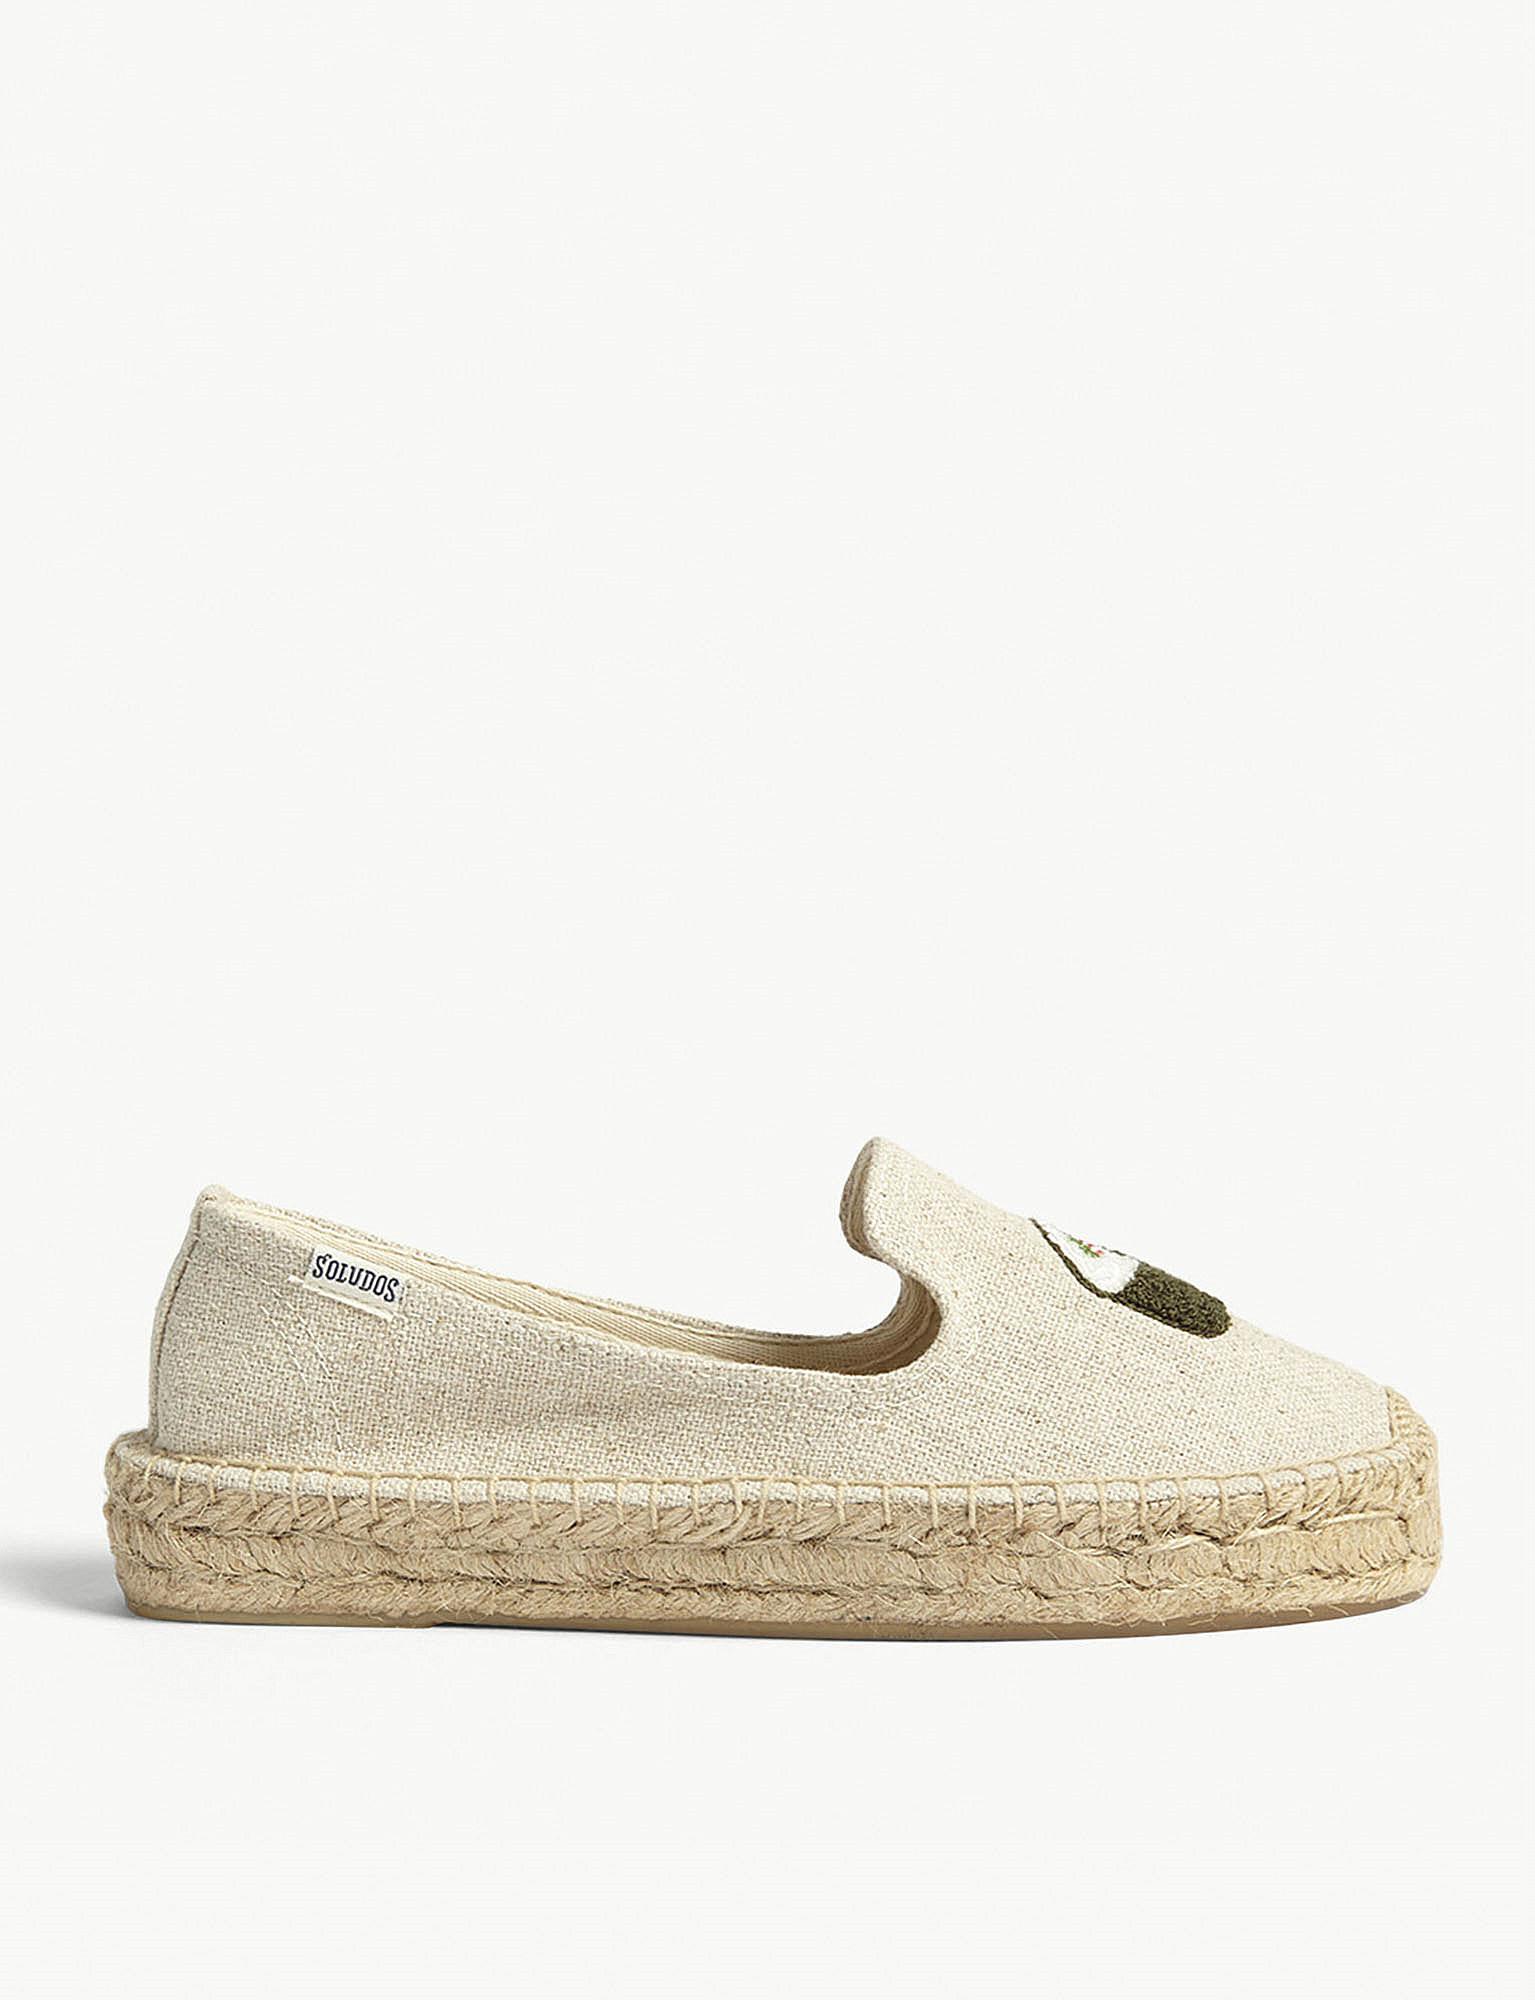 Soludos Sushi Espadrilles in Natural | Lyst